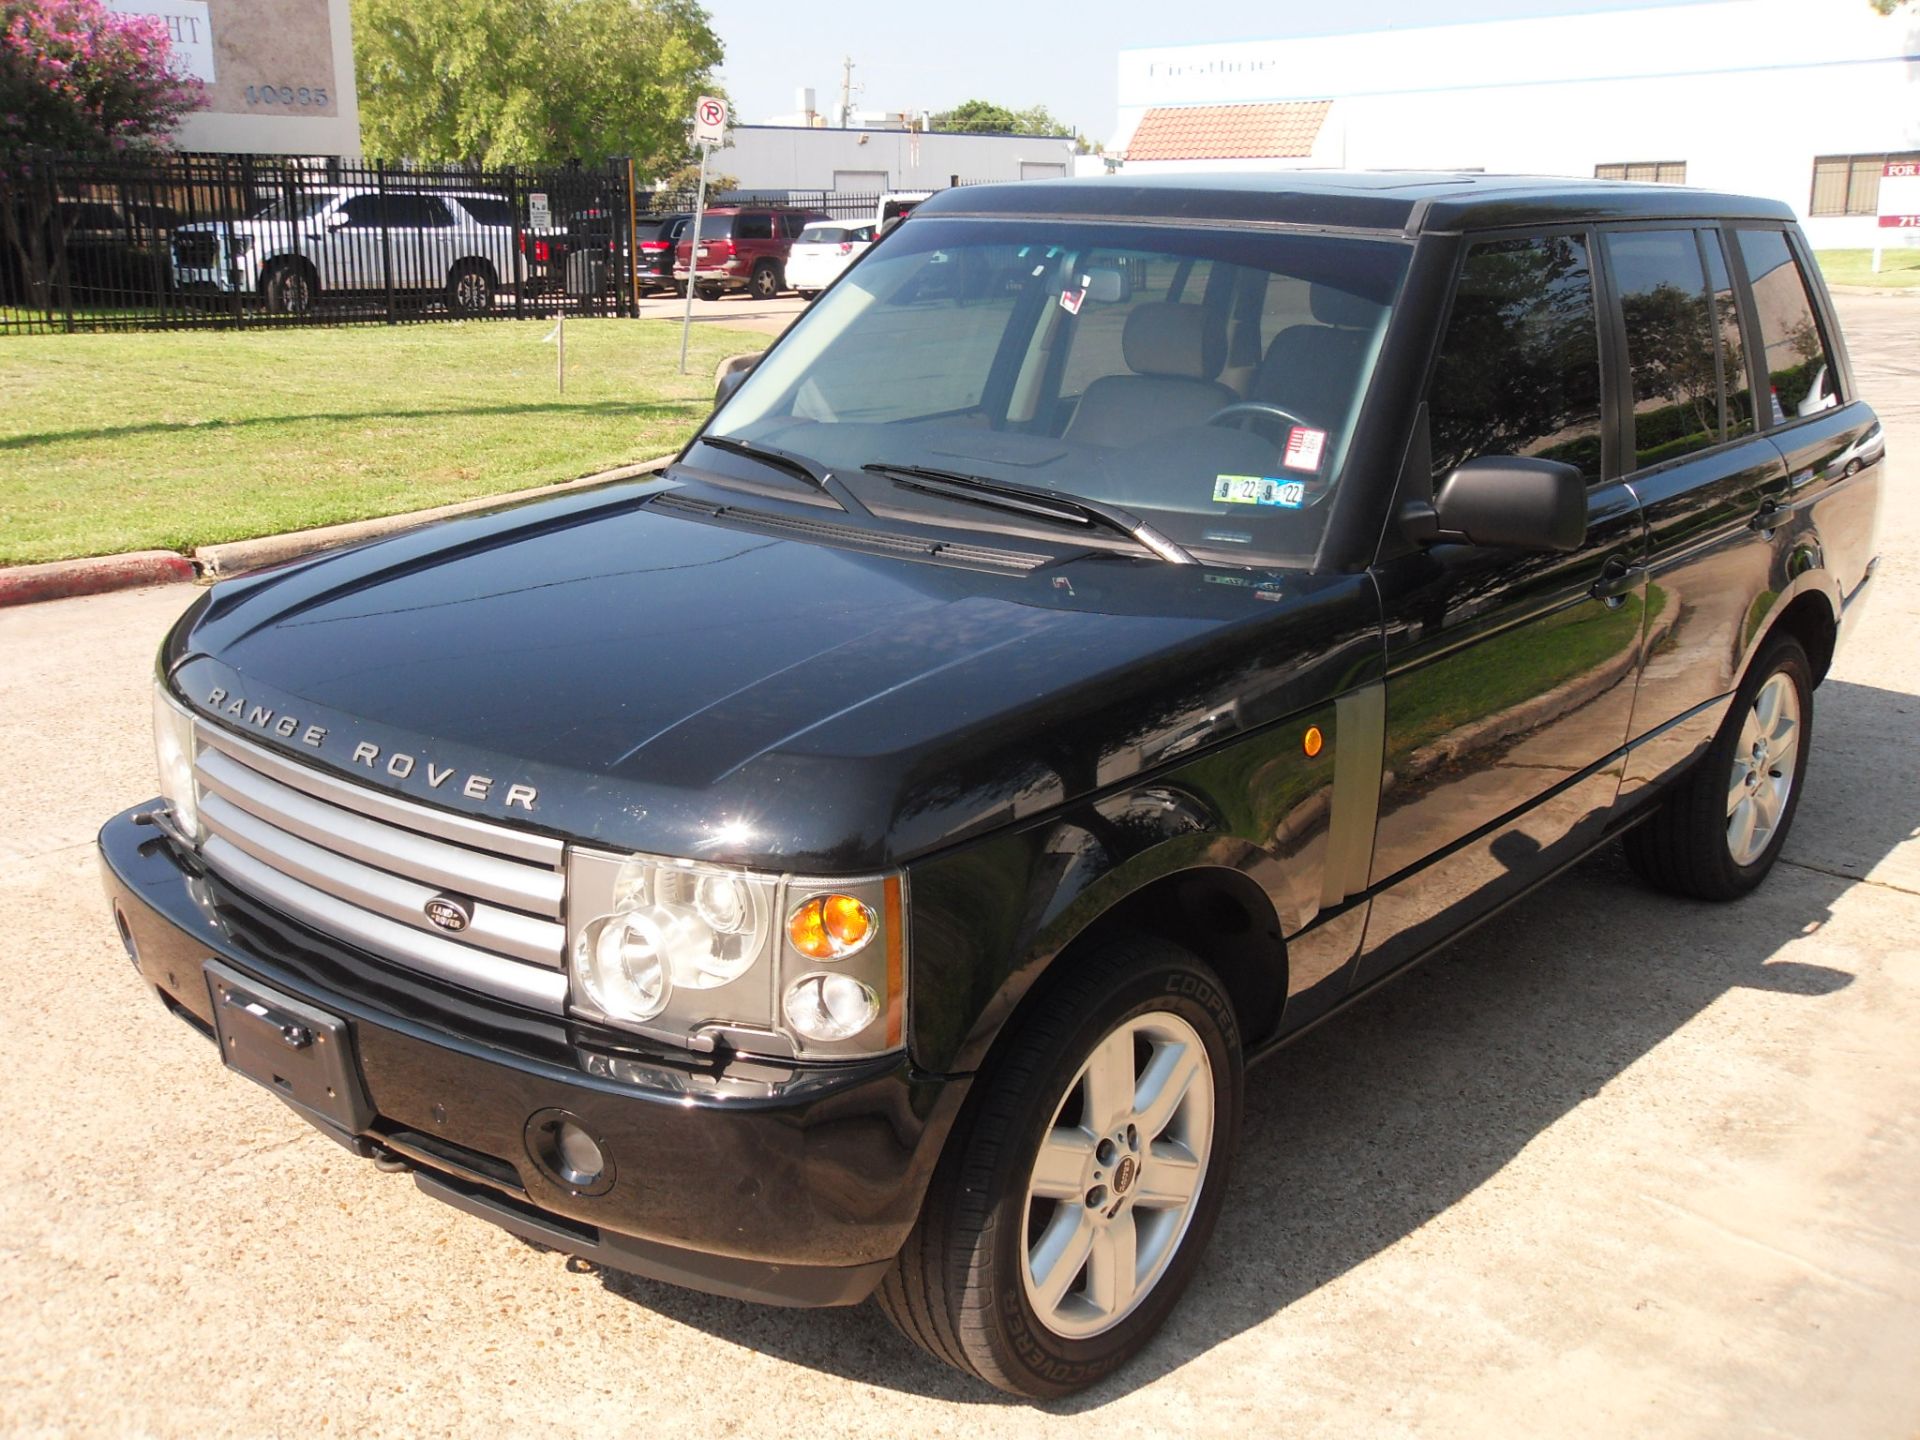 2003 Land Rover Range Rover HSE - Image 3 of 19